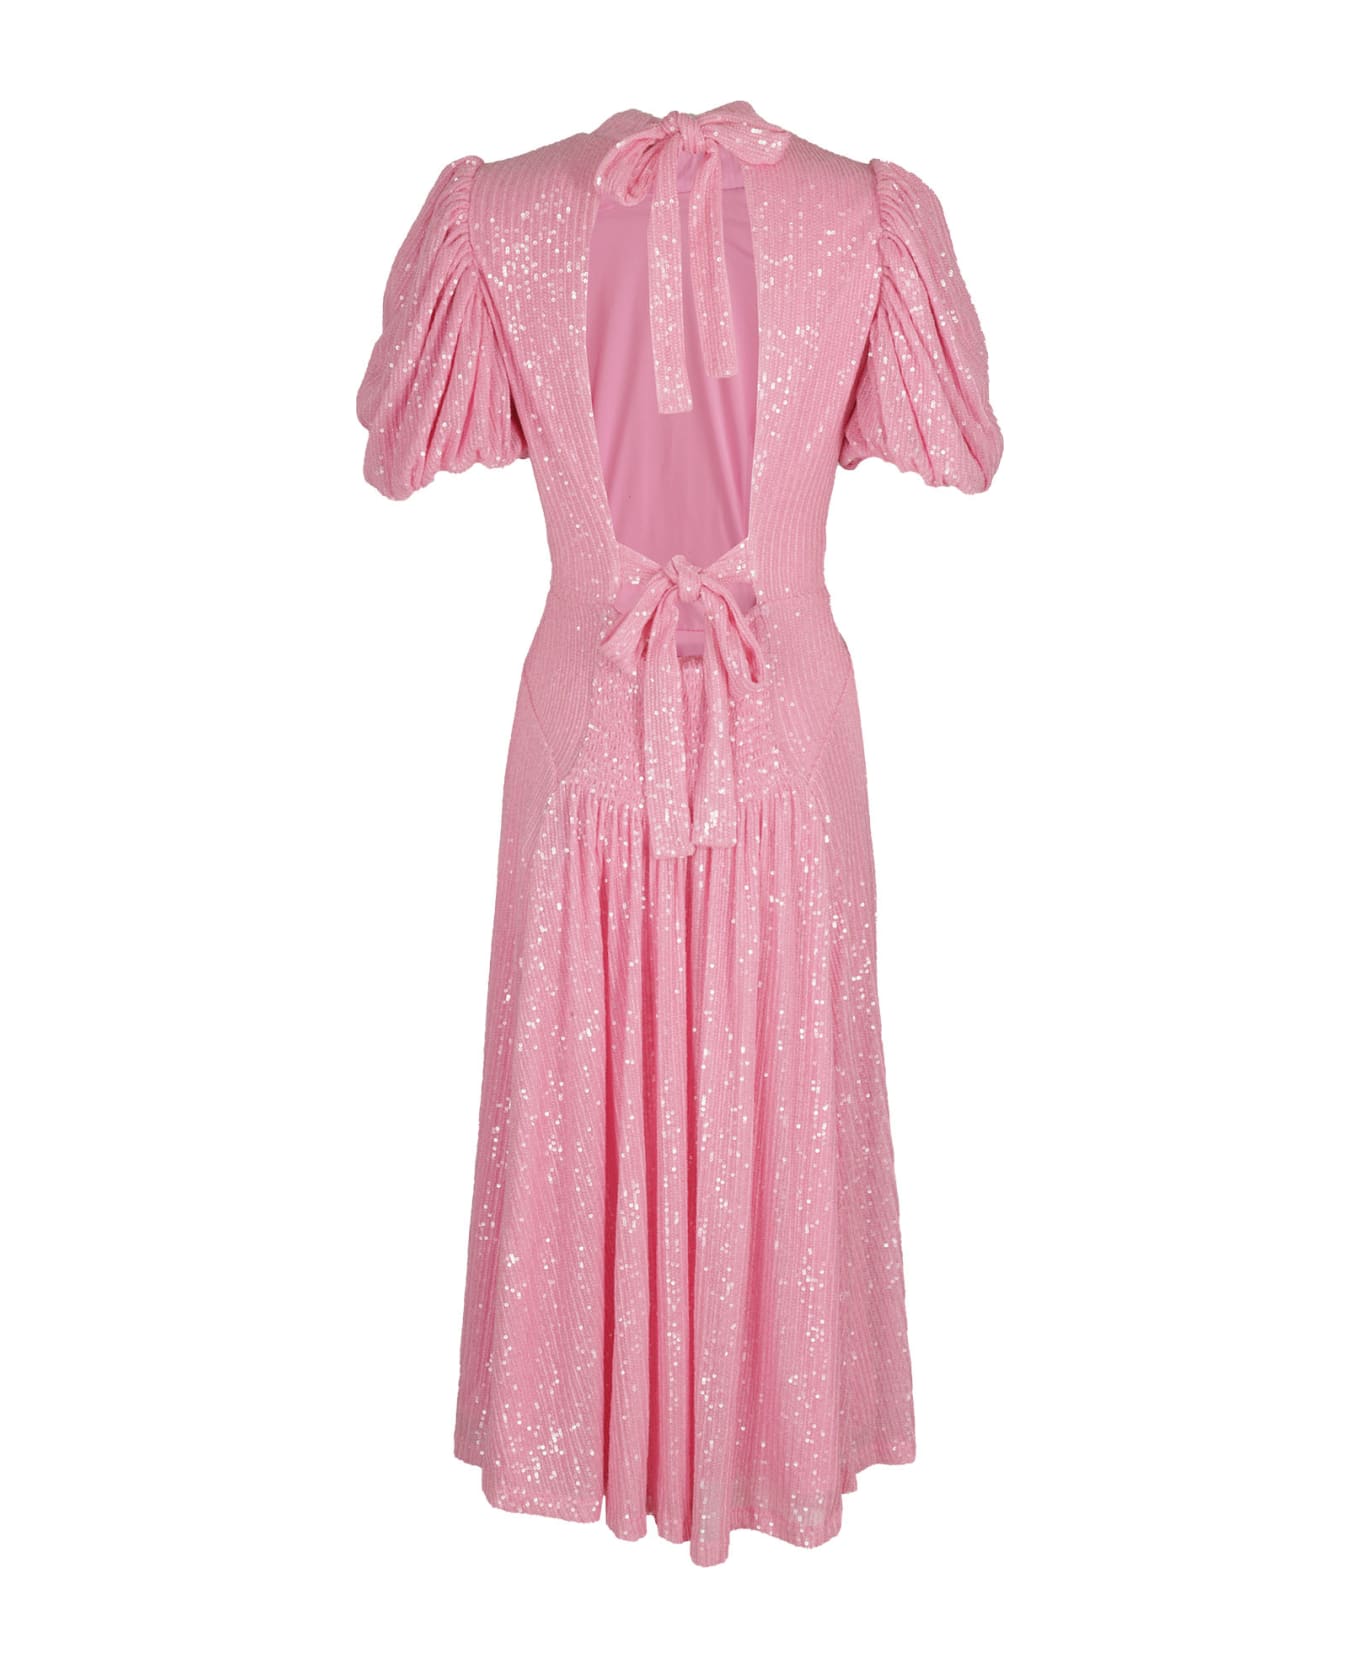 Rotate by Birger Christensen Sequined Maxi Puffy Sleeved Dress - Bergonia Pink